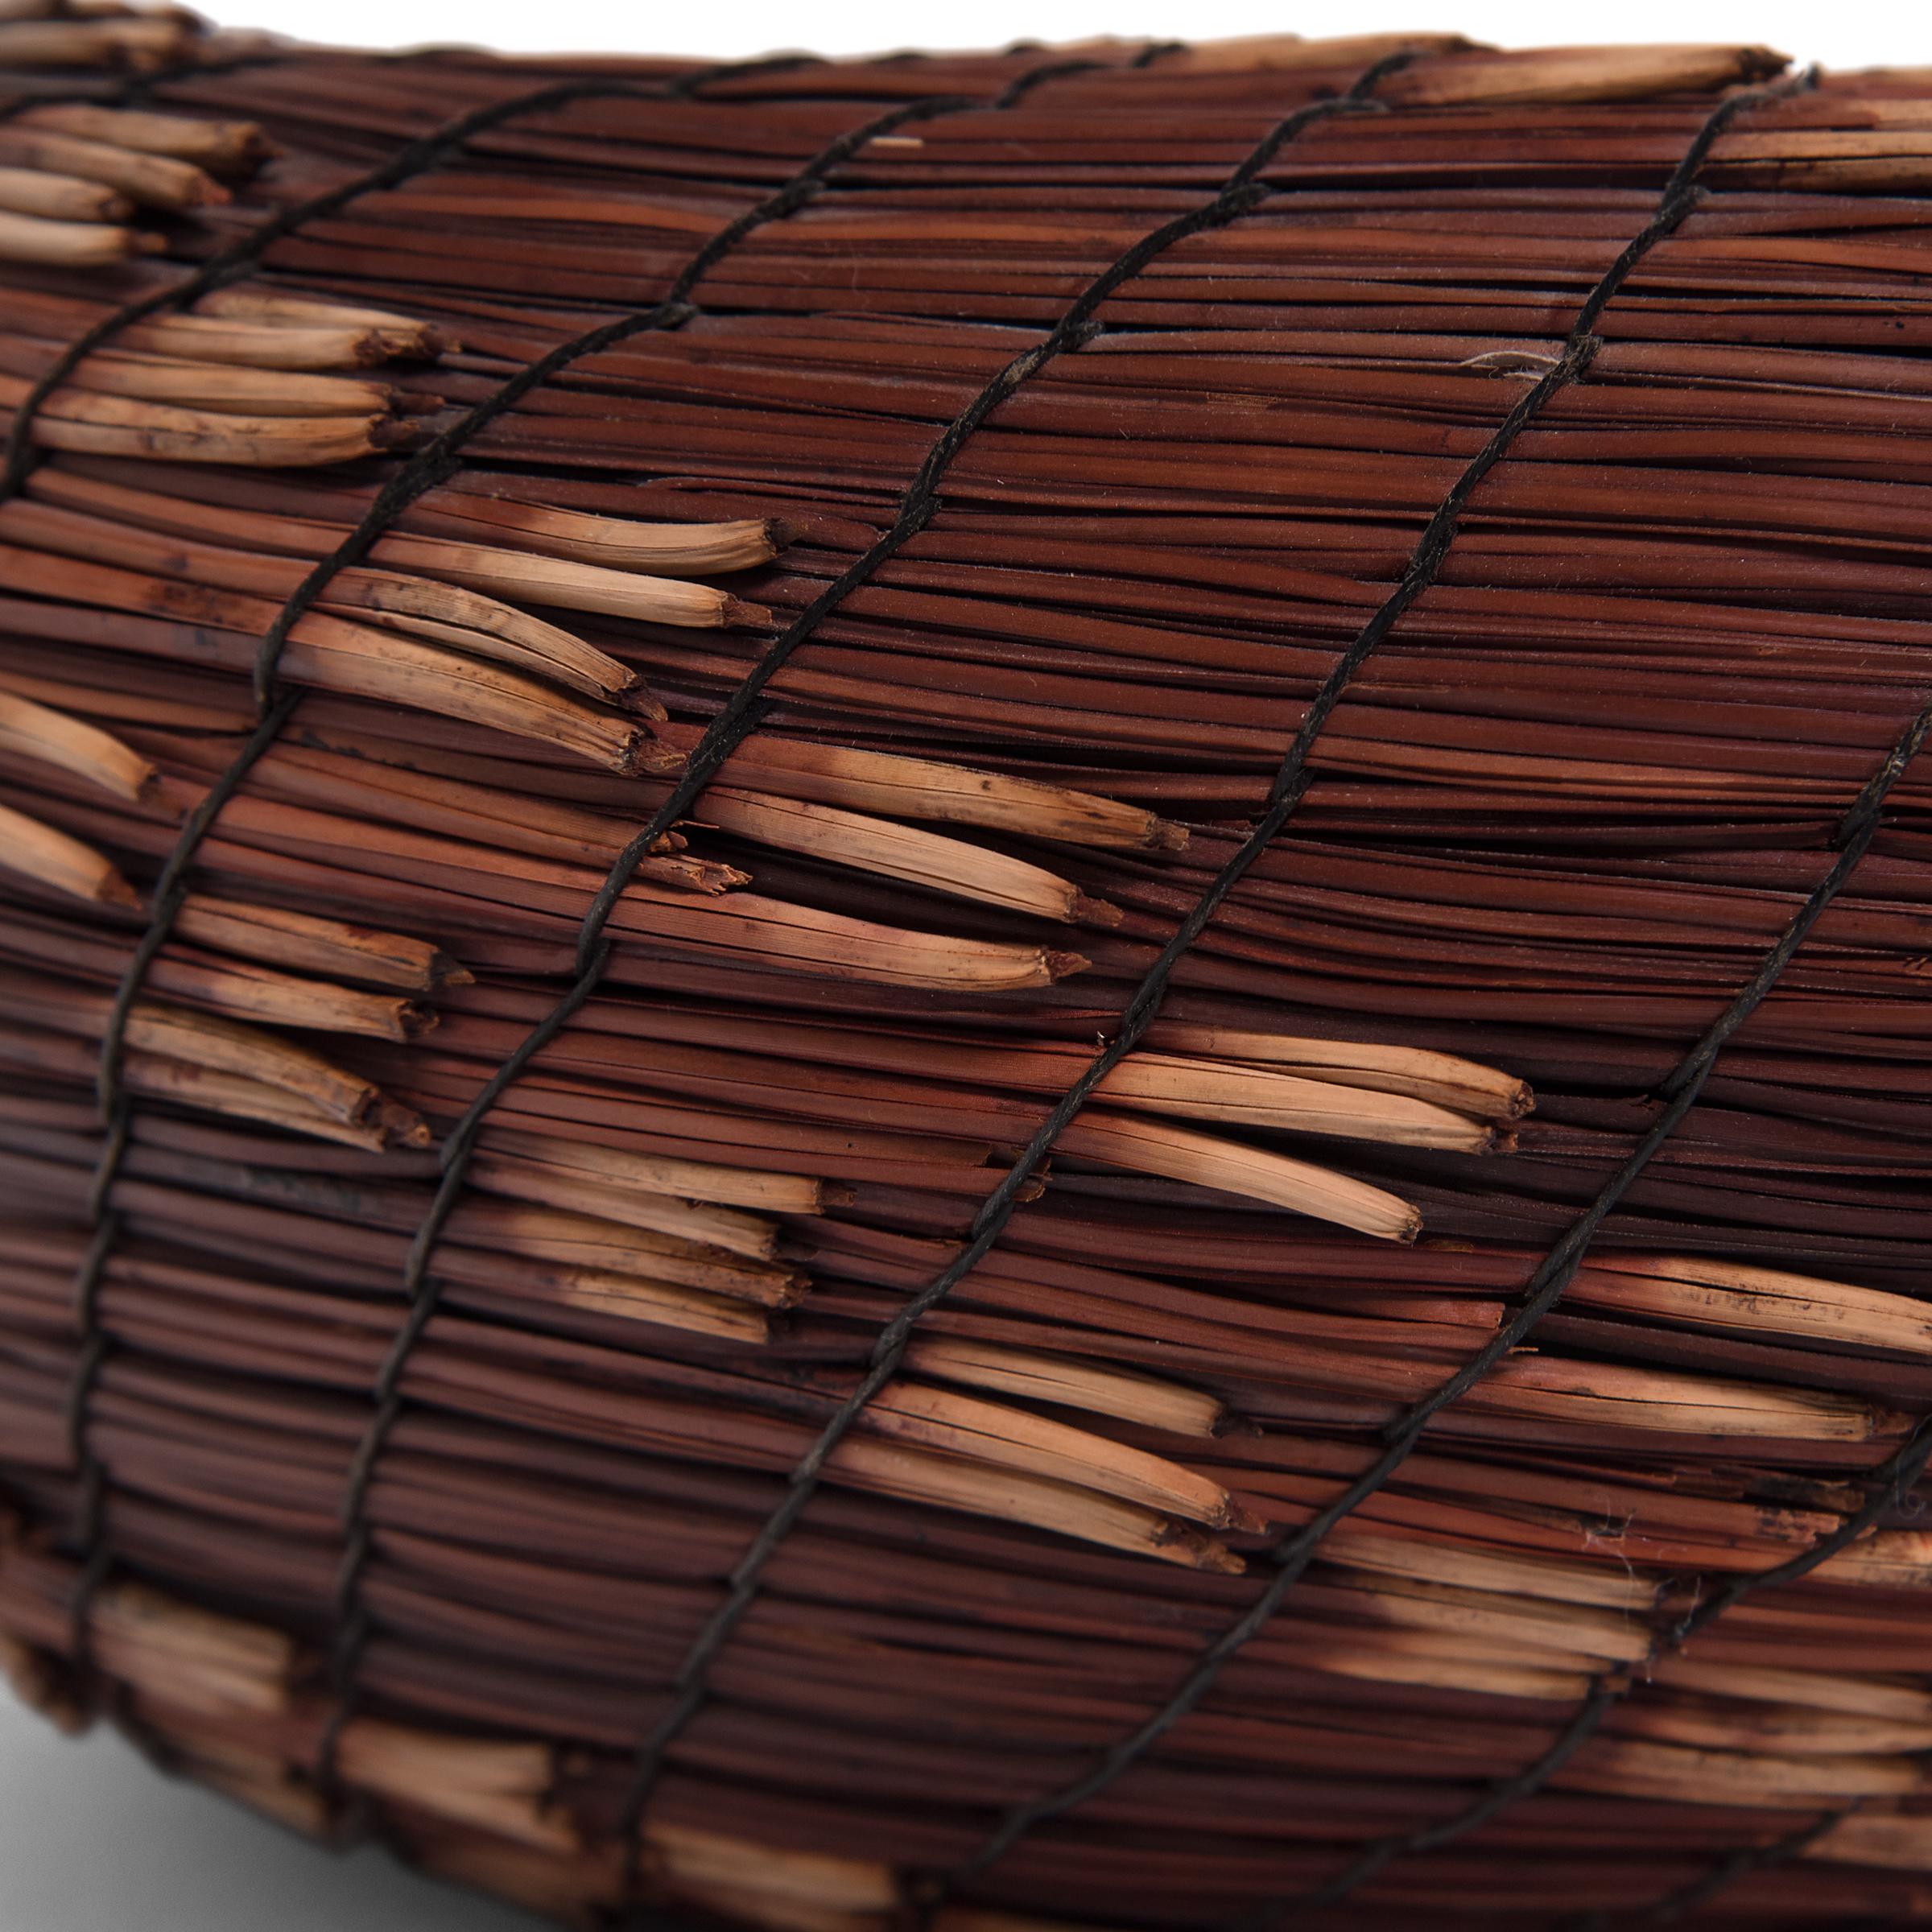 Hand-Woven Torrey Pine Needle Spiral Basket by Fran and Neil Prince